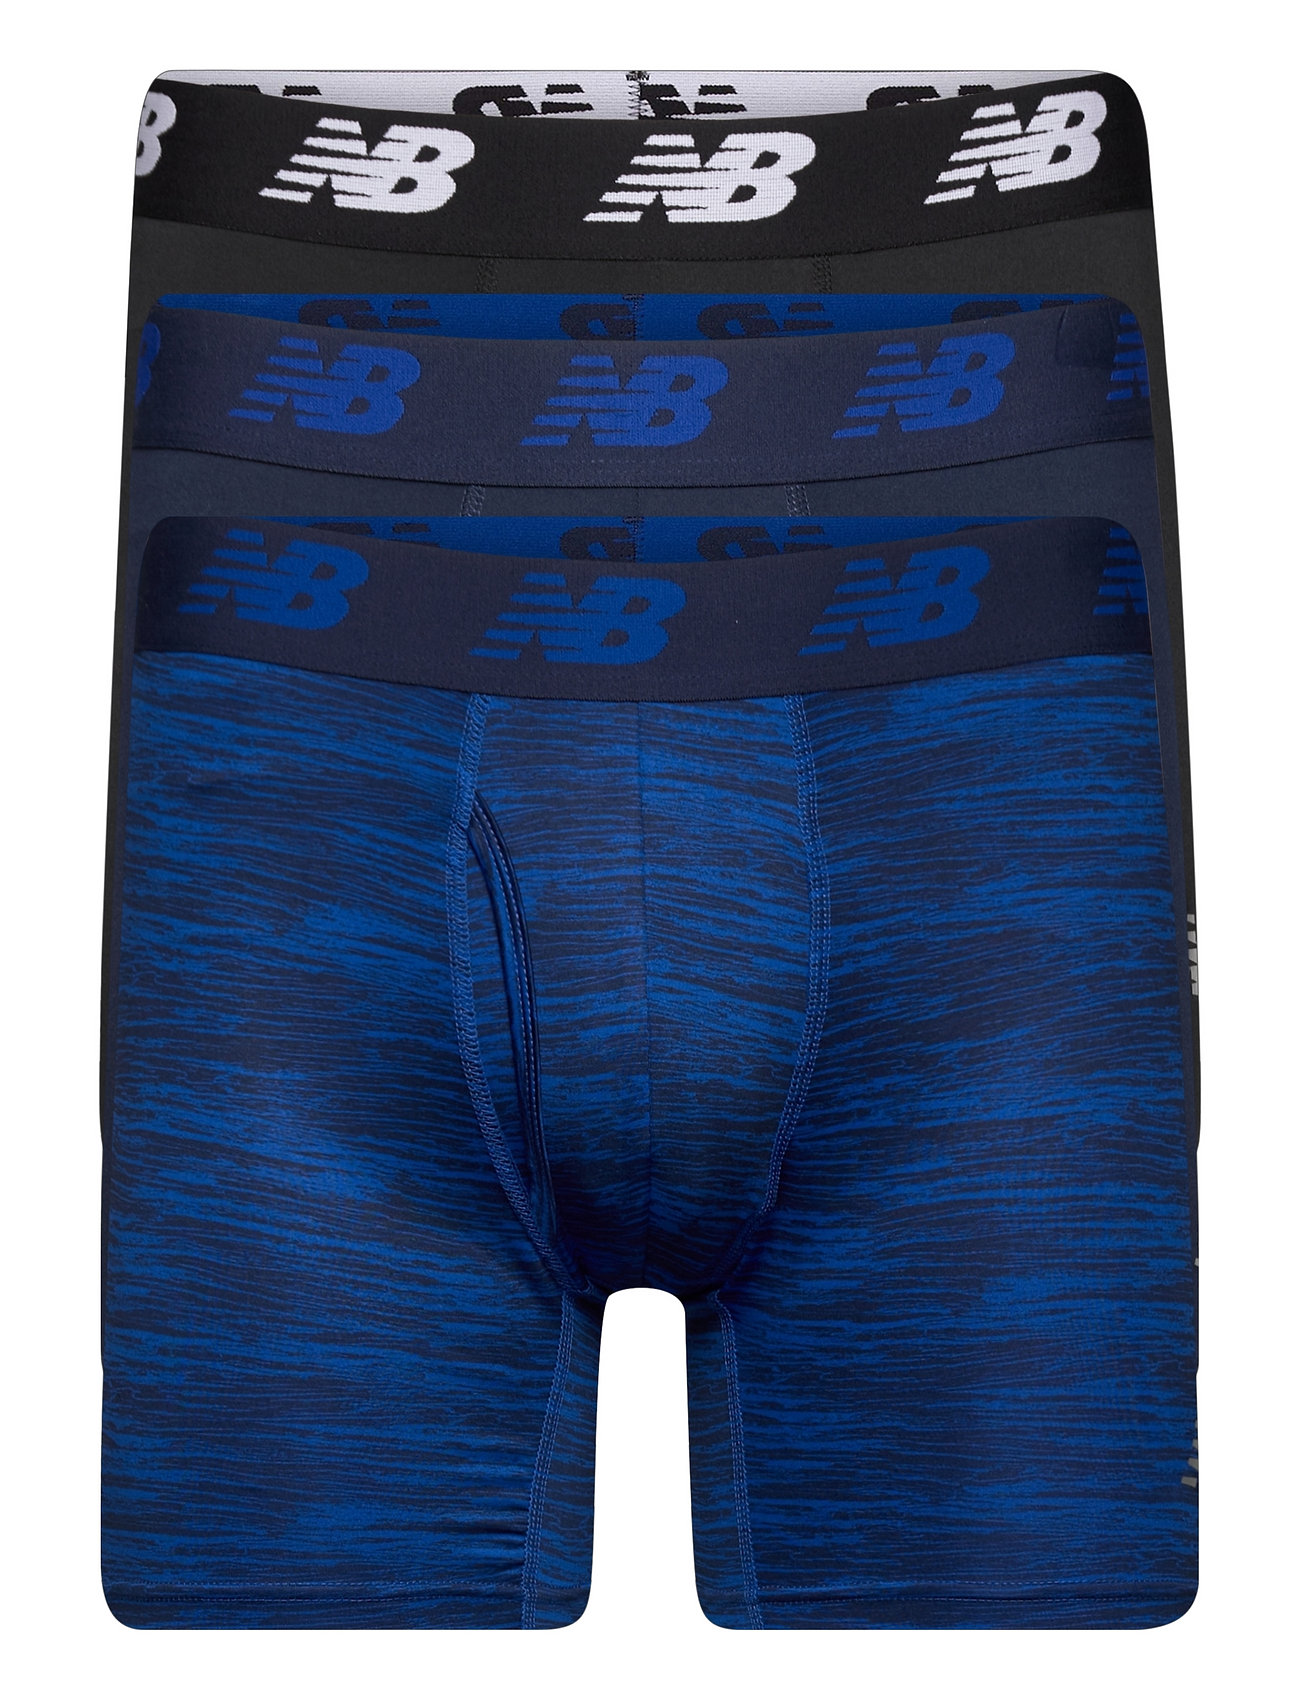 Mens Premium 6" Boxer Brief With Fly 3 Pack Sport Boxers Blue New Balance